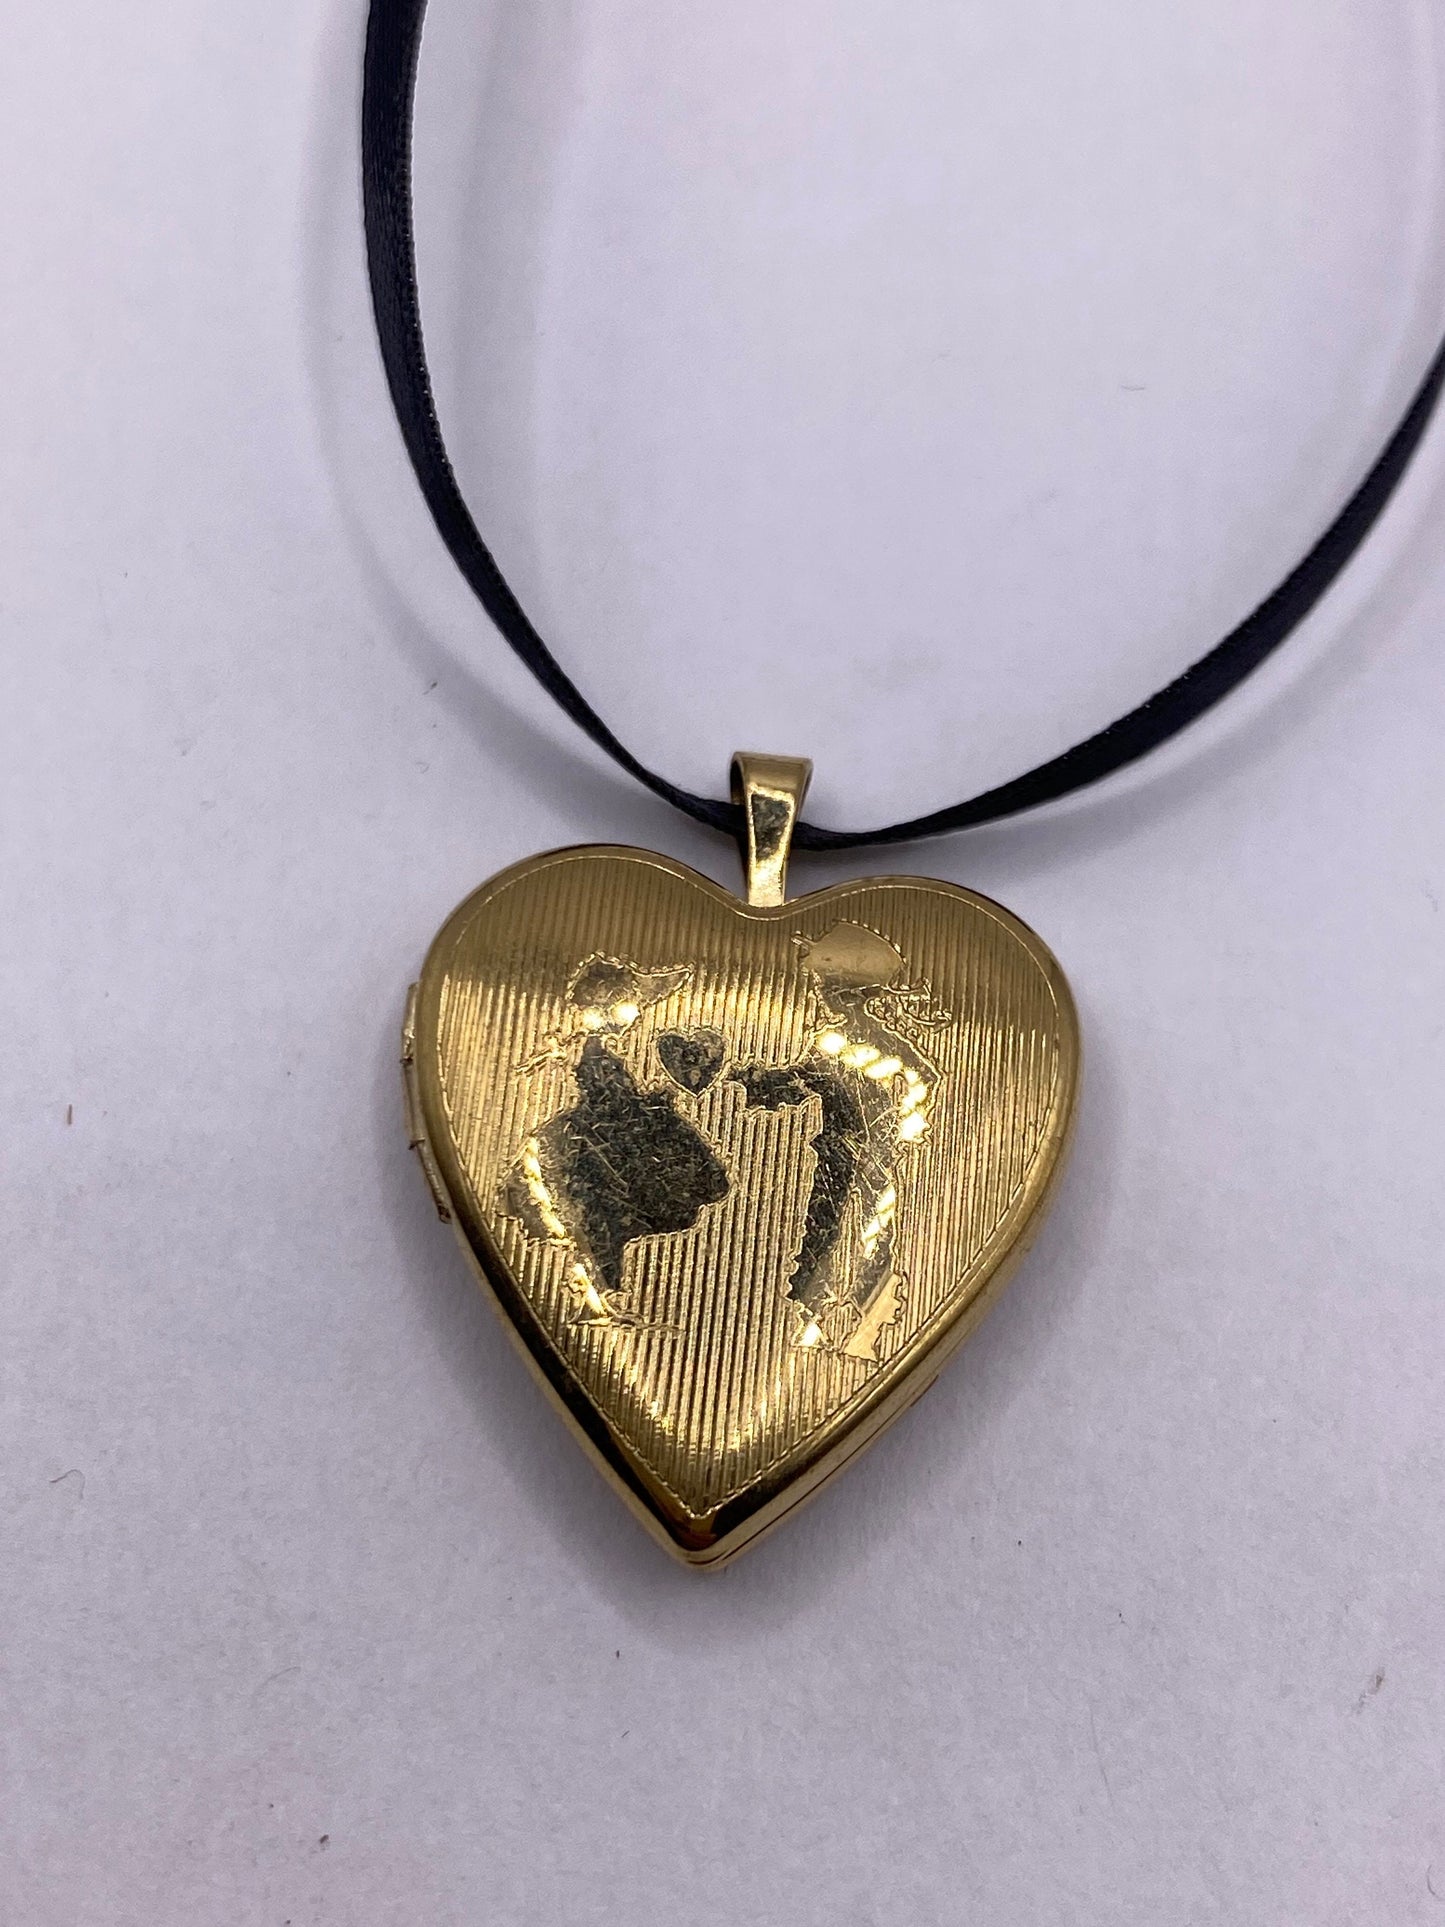 Vintage Gold Locket | Tiny Heart 9k Gold Filled Pendant Photo Memory Charm Engraved Sweethearts | Choker Necklace